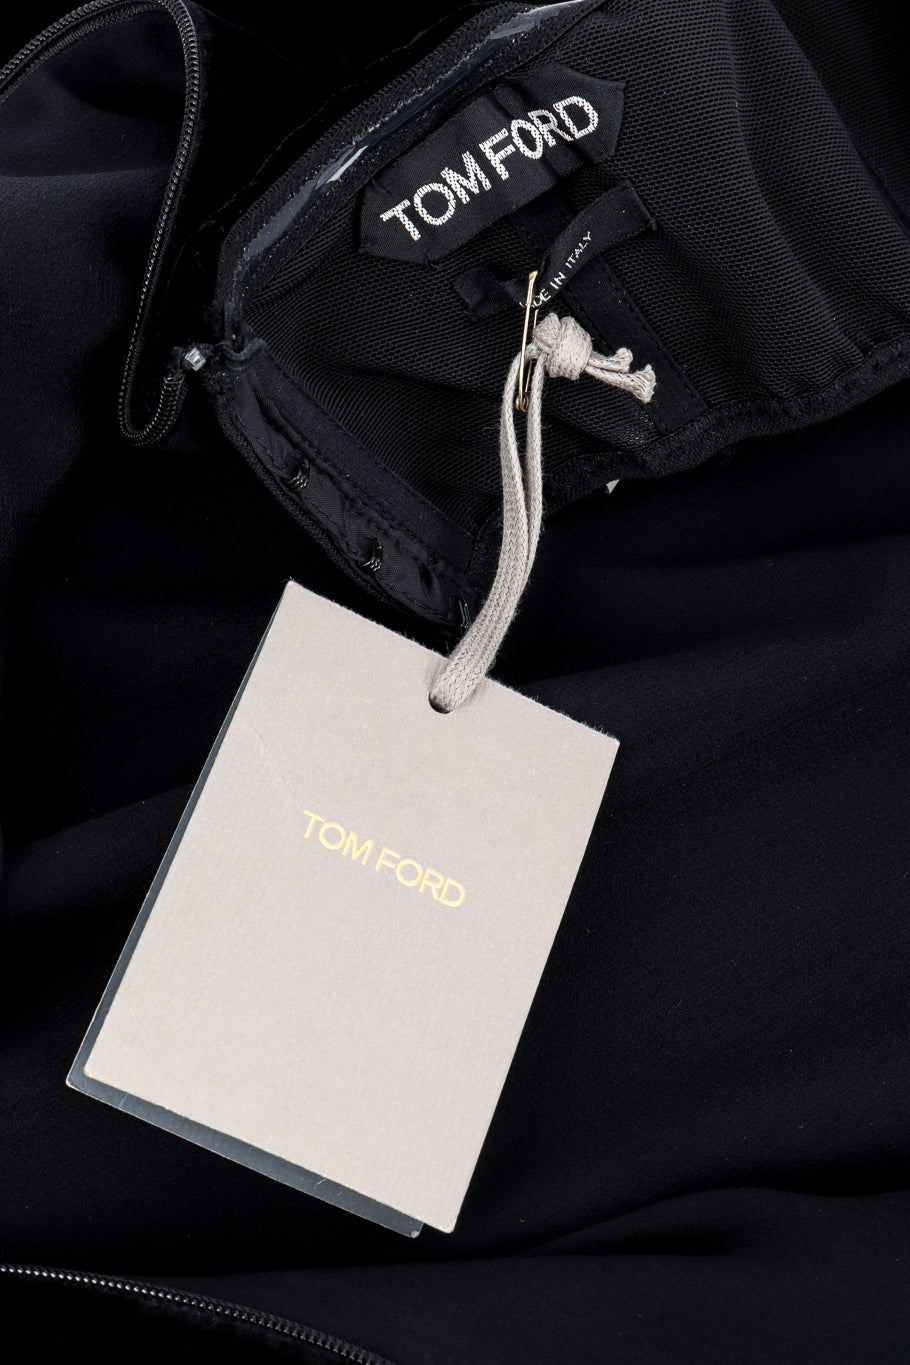 Tom Ford Strapless Velvet & Leopard Cutout Dress signature label and hang tag @recess la